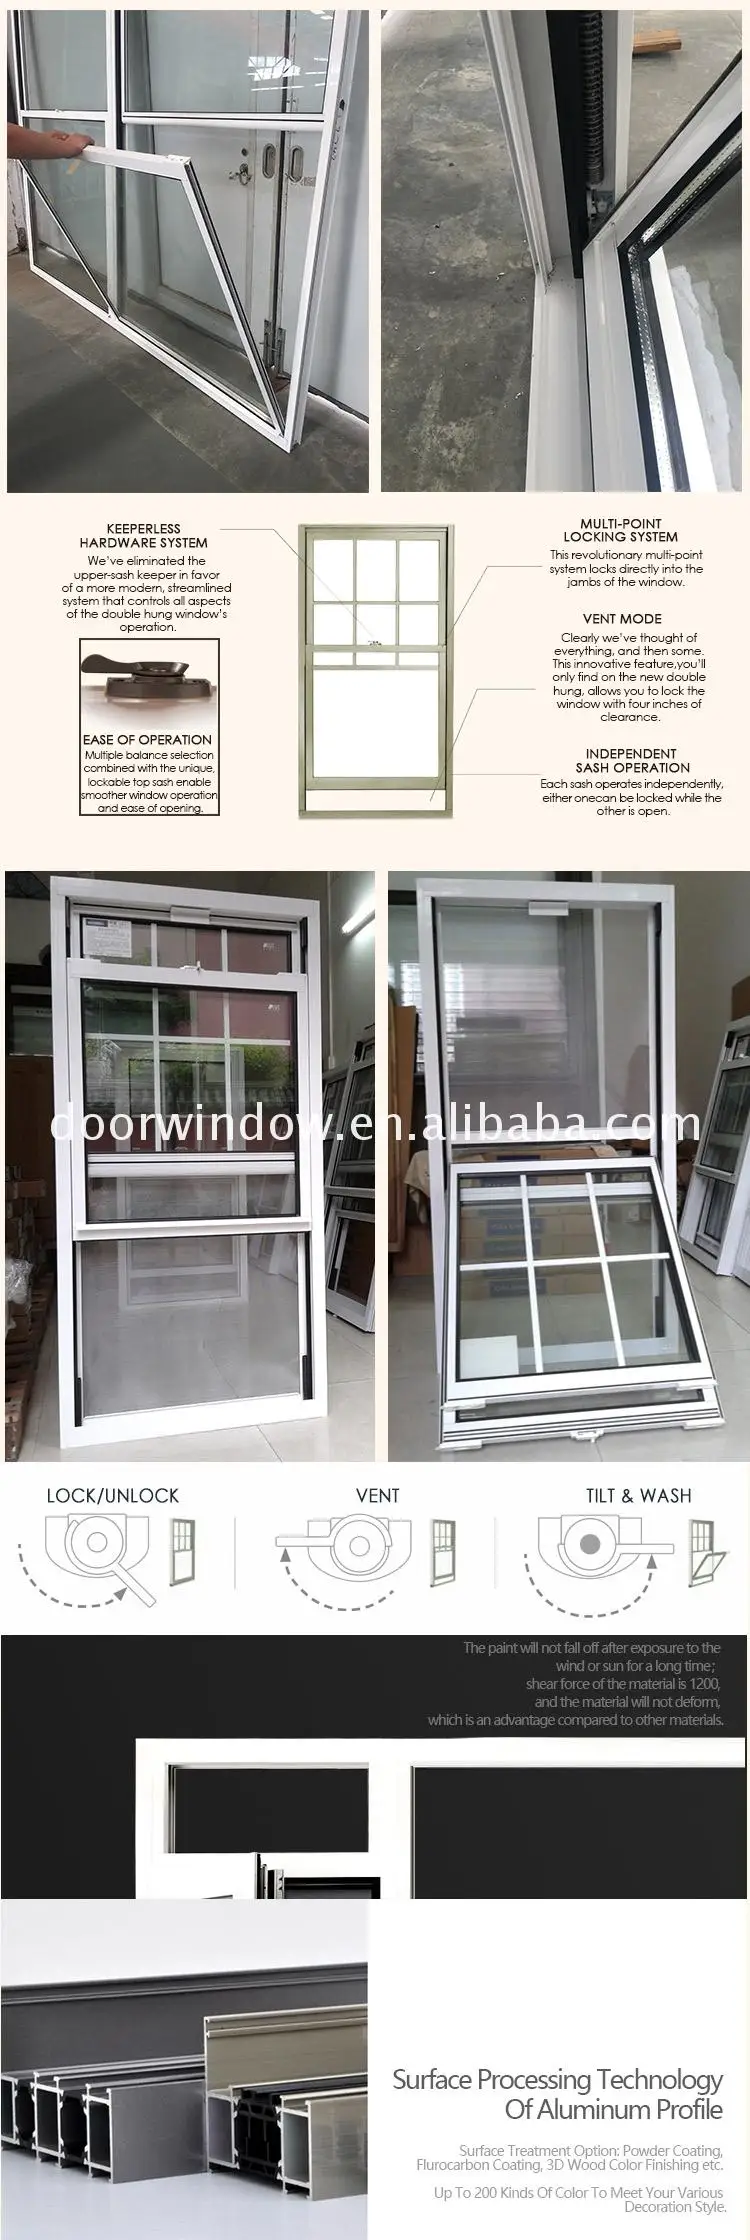 jalousie windows in the Philippines double hung impact windows impact